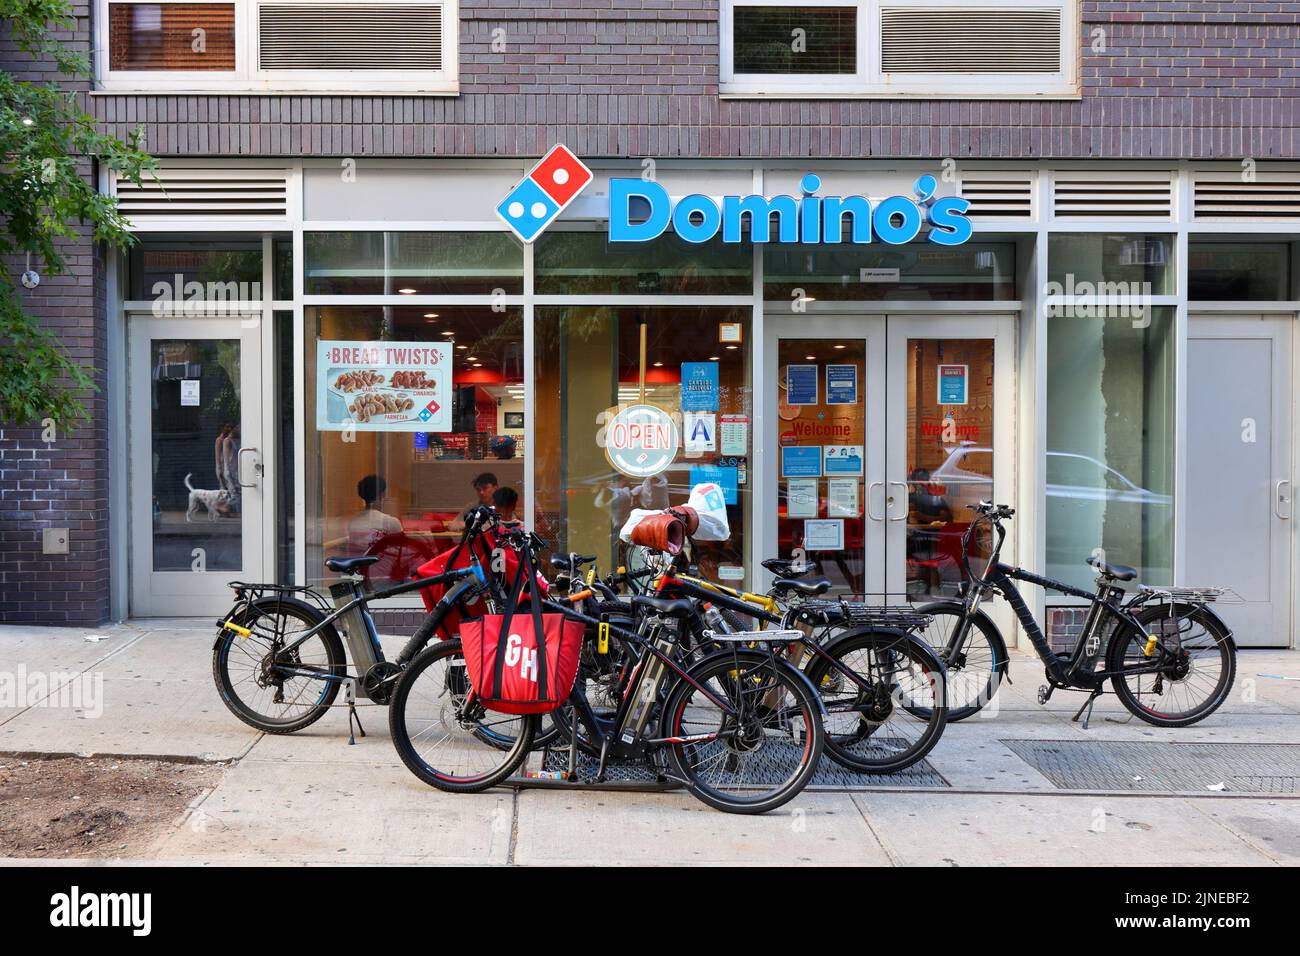 Domino's Pizza, 196 Stanton St, New York, NYC storefront photo of a pizza shop chain restaurant in Manhattan's Lower East Side neighborhood. Stock Photo